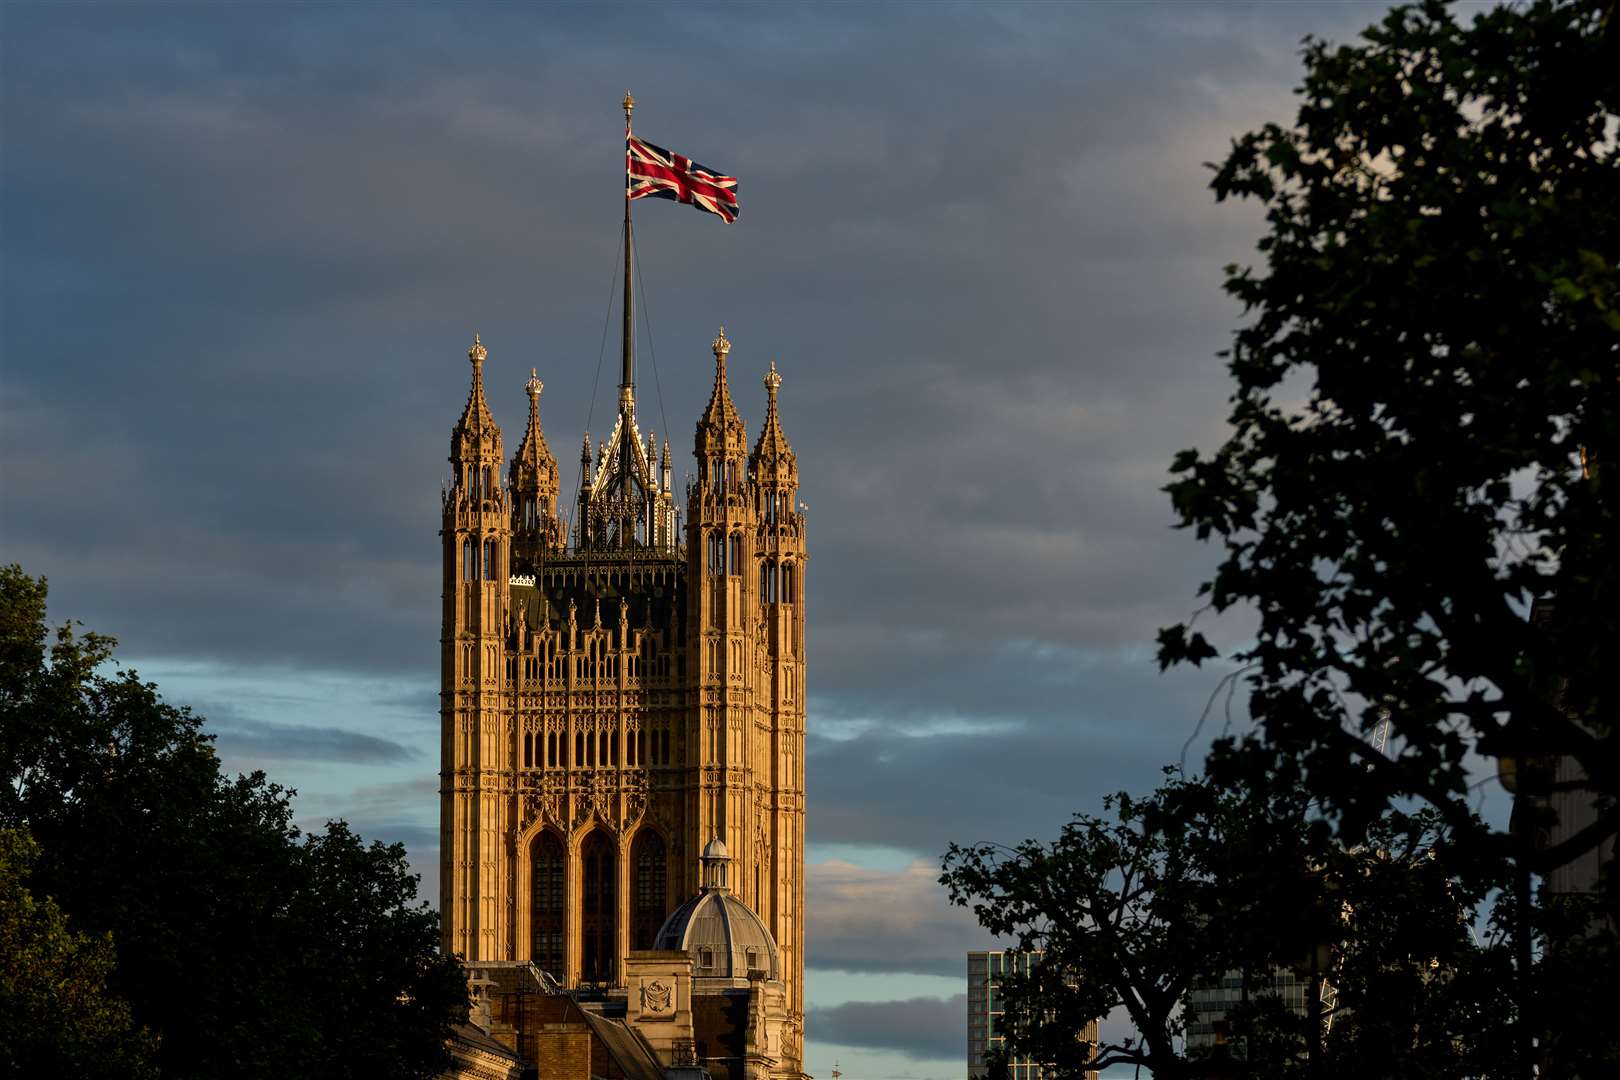 Victoria Tower, part of the Palace of Westminster in London (John Walton/PA)